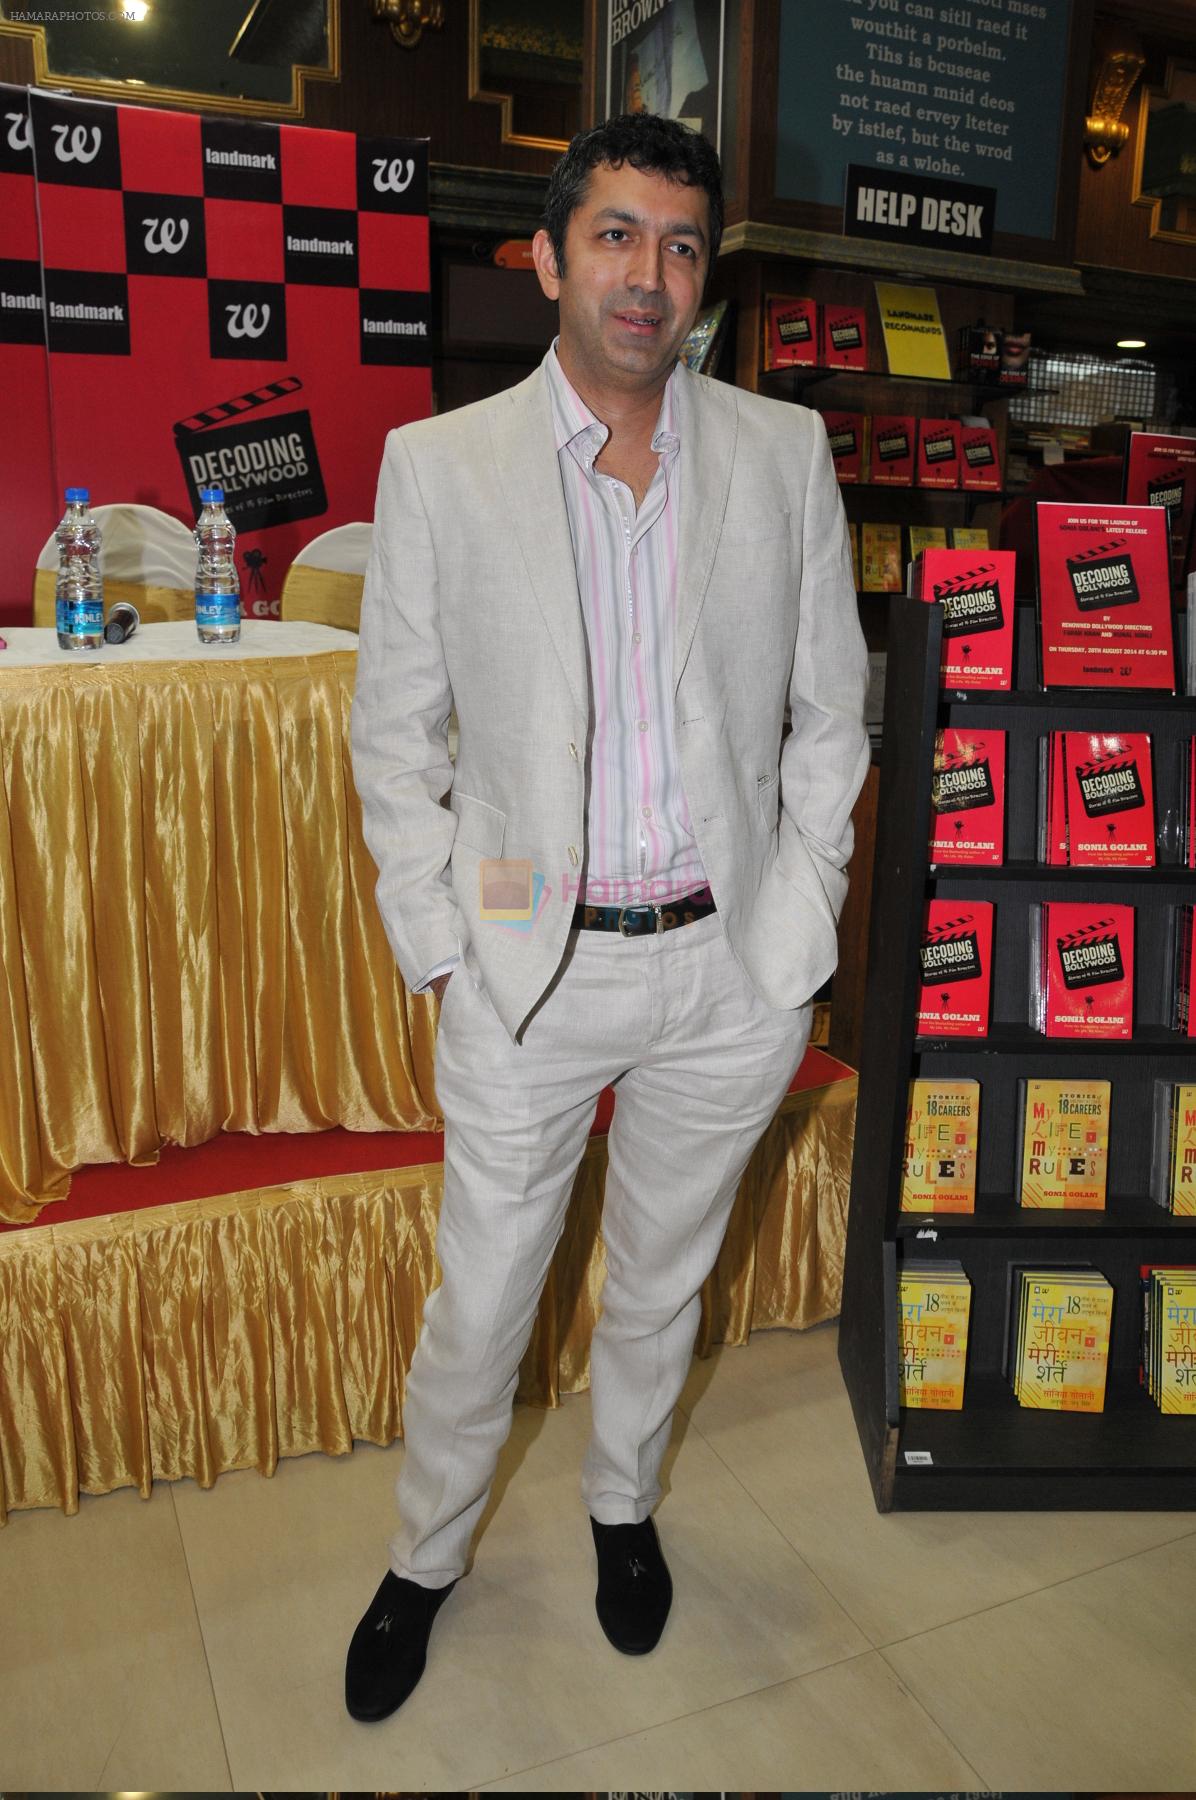 Director Kunal Kohli seen at Decoding Bollywood book launch event by Author Sonia Golani of Westland publishers